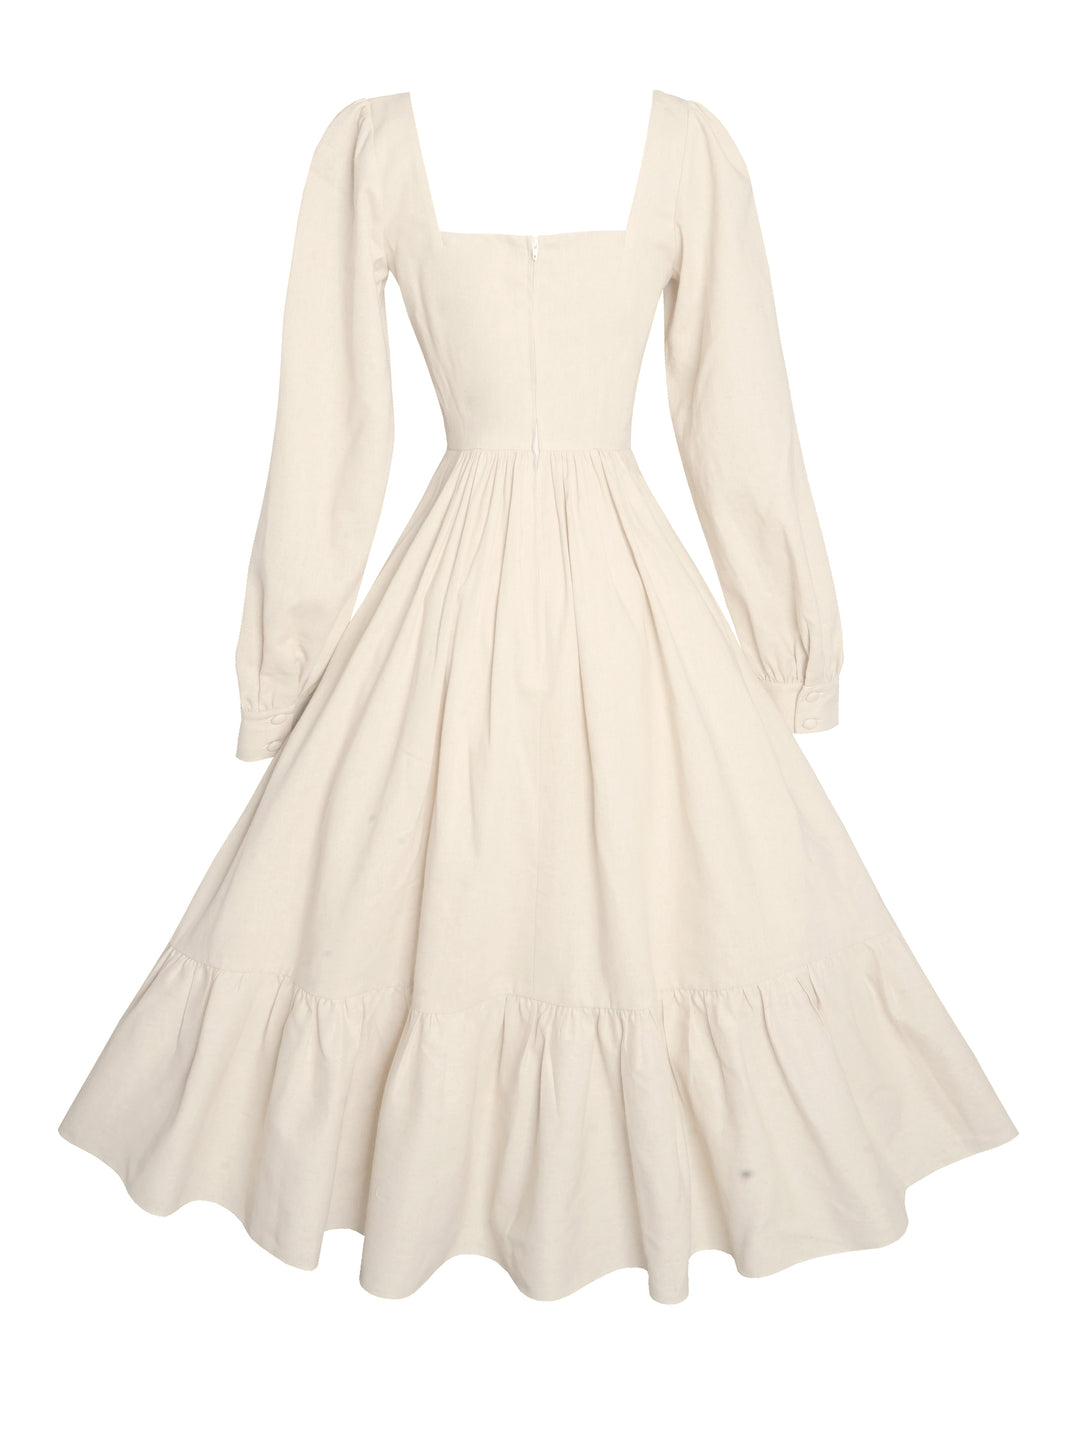 MTO - Mary Dress in Parchment Ivory Linen